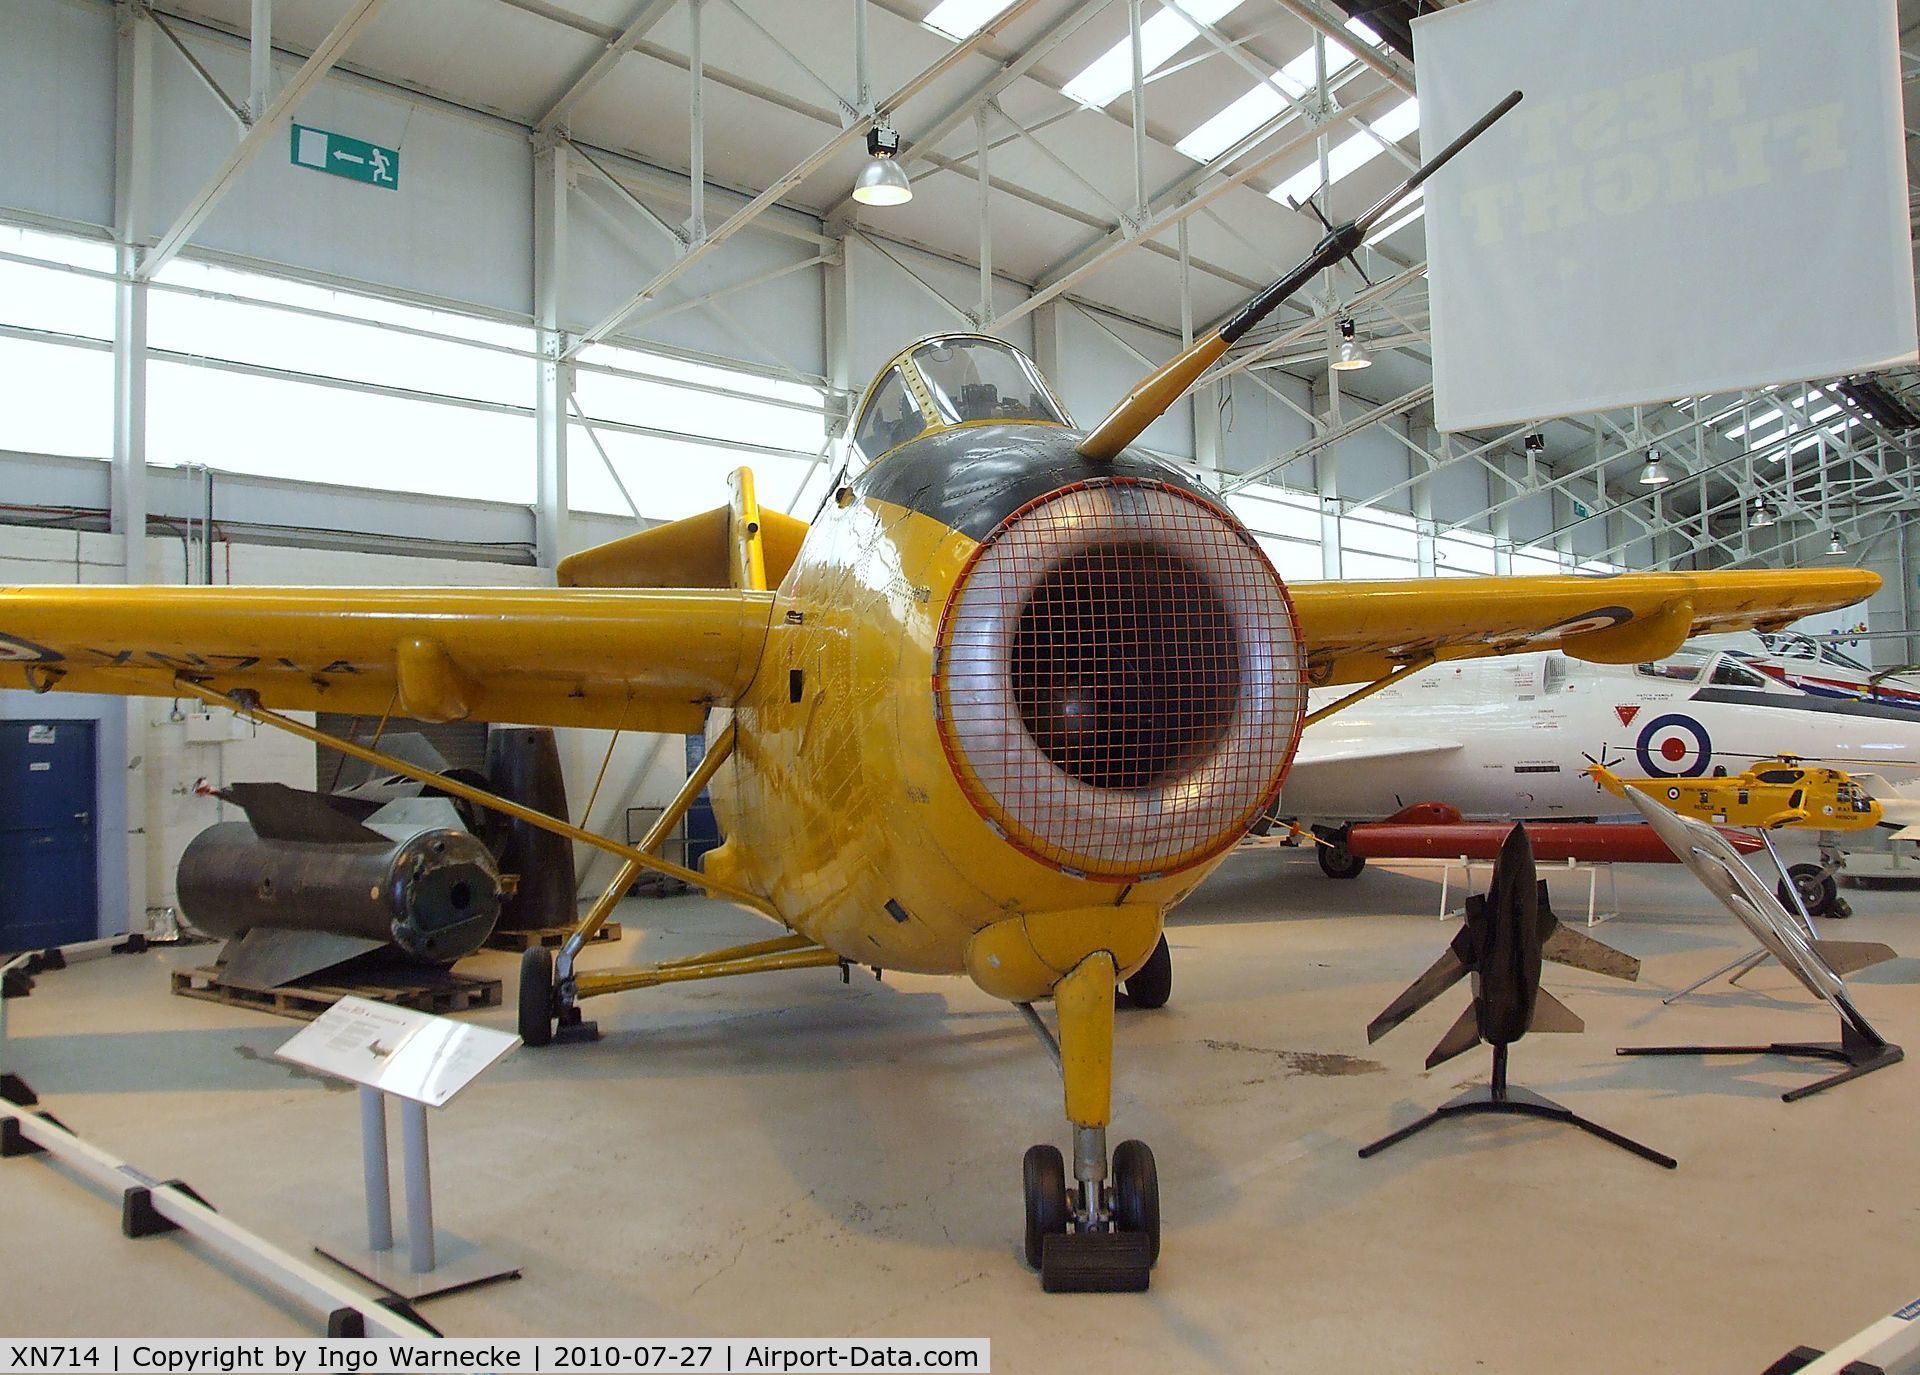 XN714, 1963 Hunting H.126 C/N H1-1, Hunting H.126 at the RAF Museum, Cosford